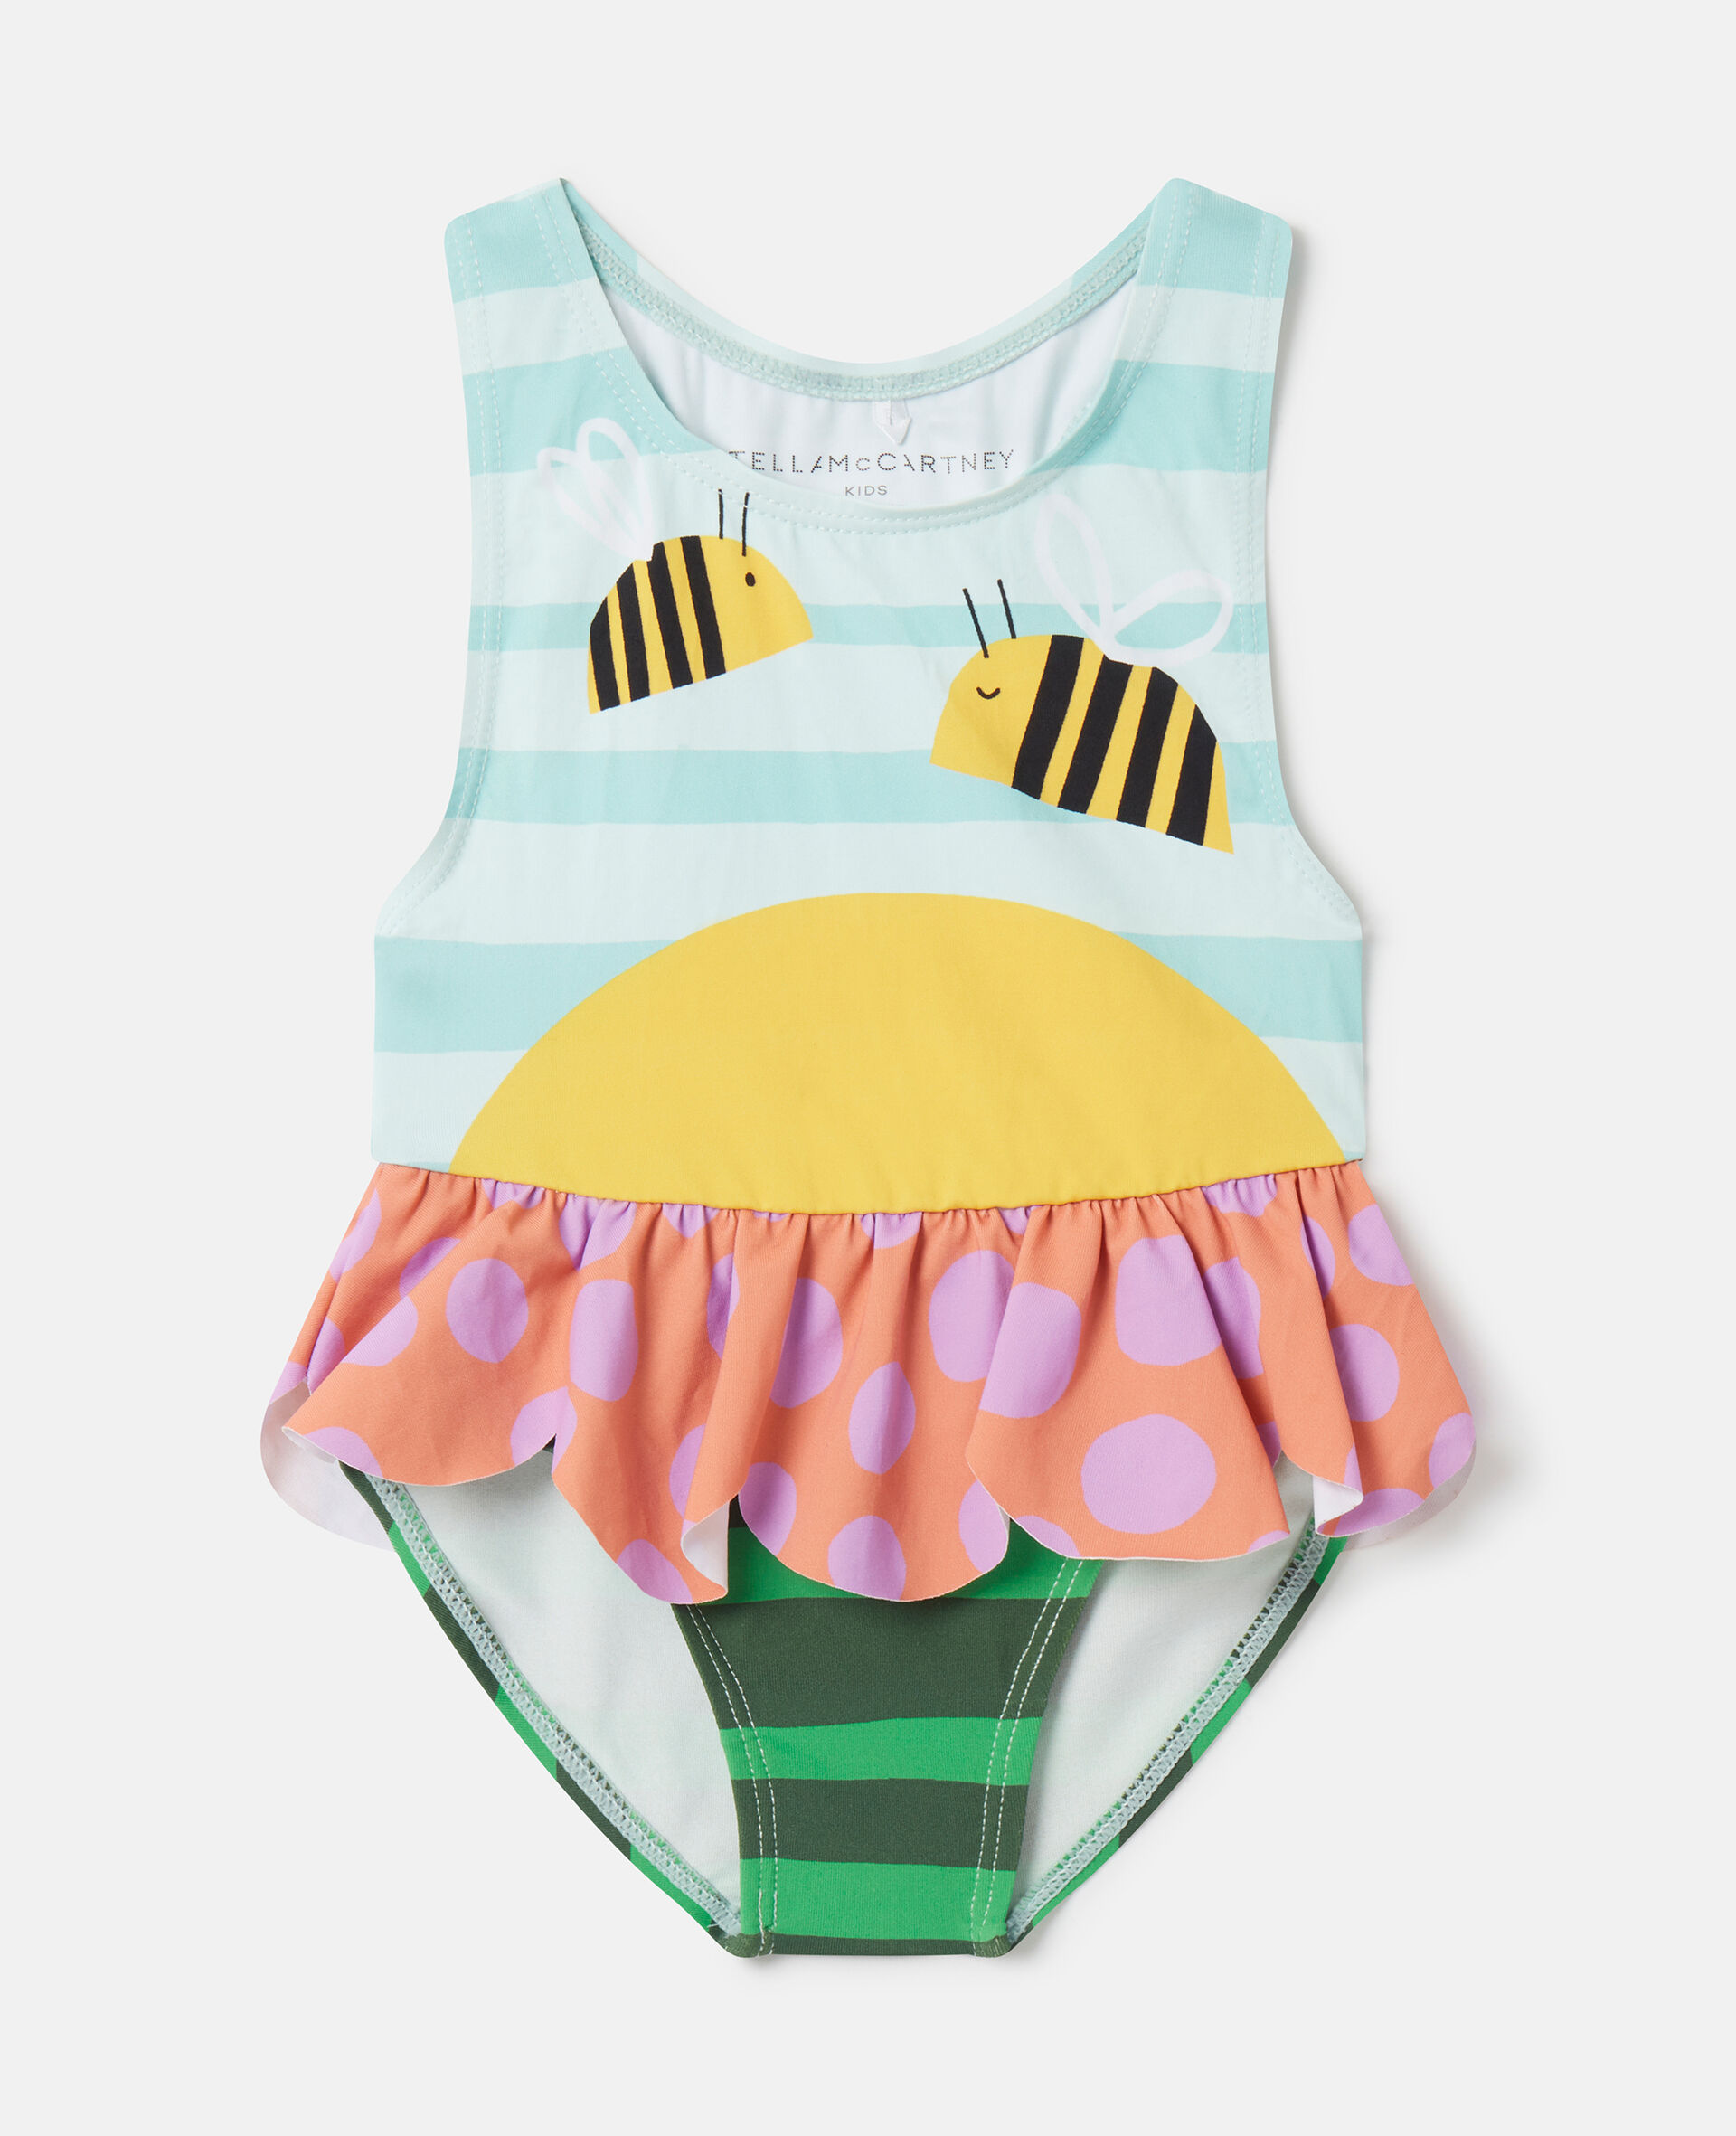 Bumblebee Landscape Print Swimsuit-Fantaisie-large image number 0